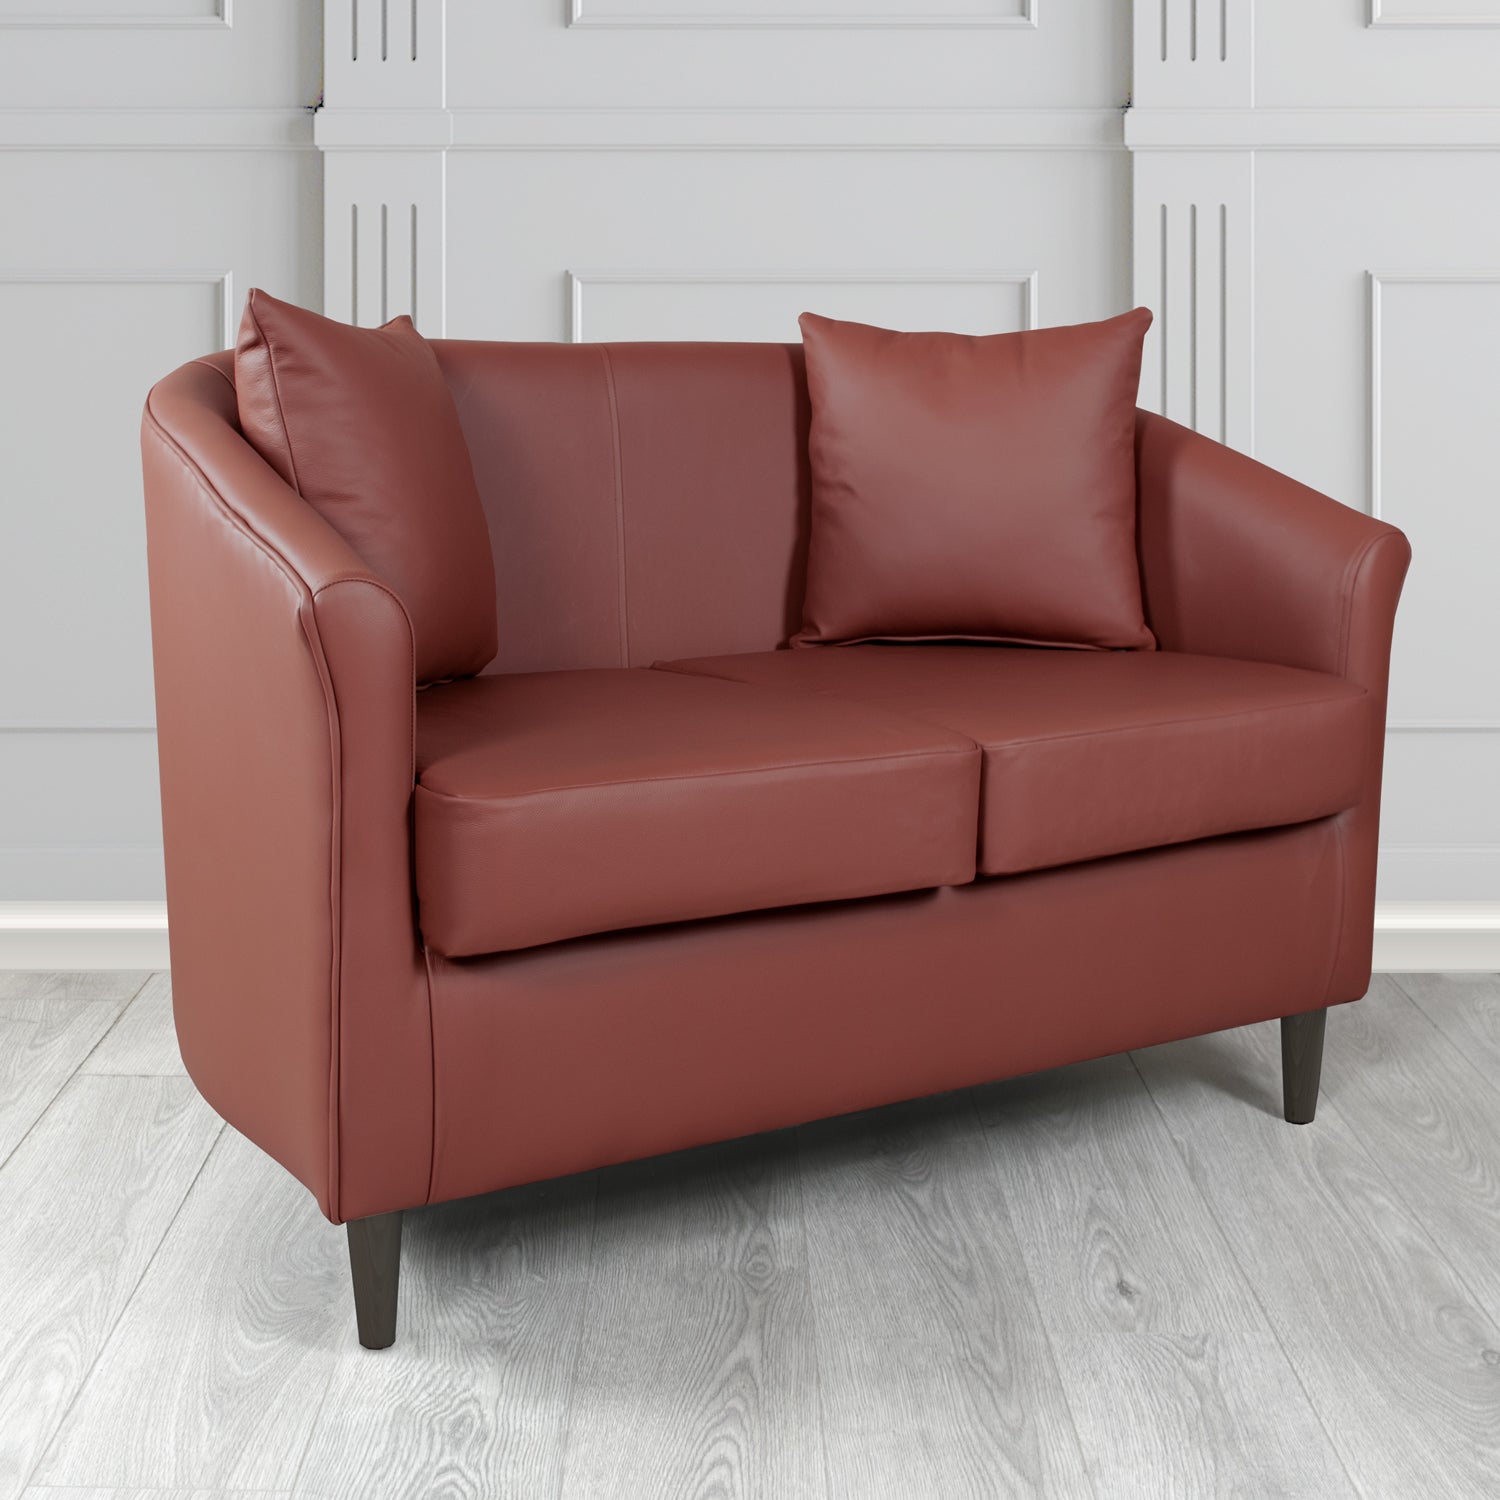 St Tropez Shelly Dark Grape Crib 5 Genuine Leather 2 Seater Tub Sofa with Scatter Cushions - The Tub Chair Shop